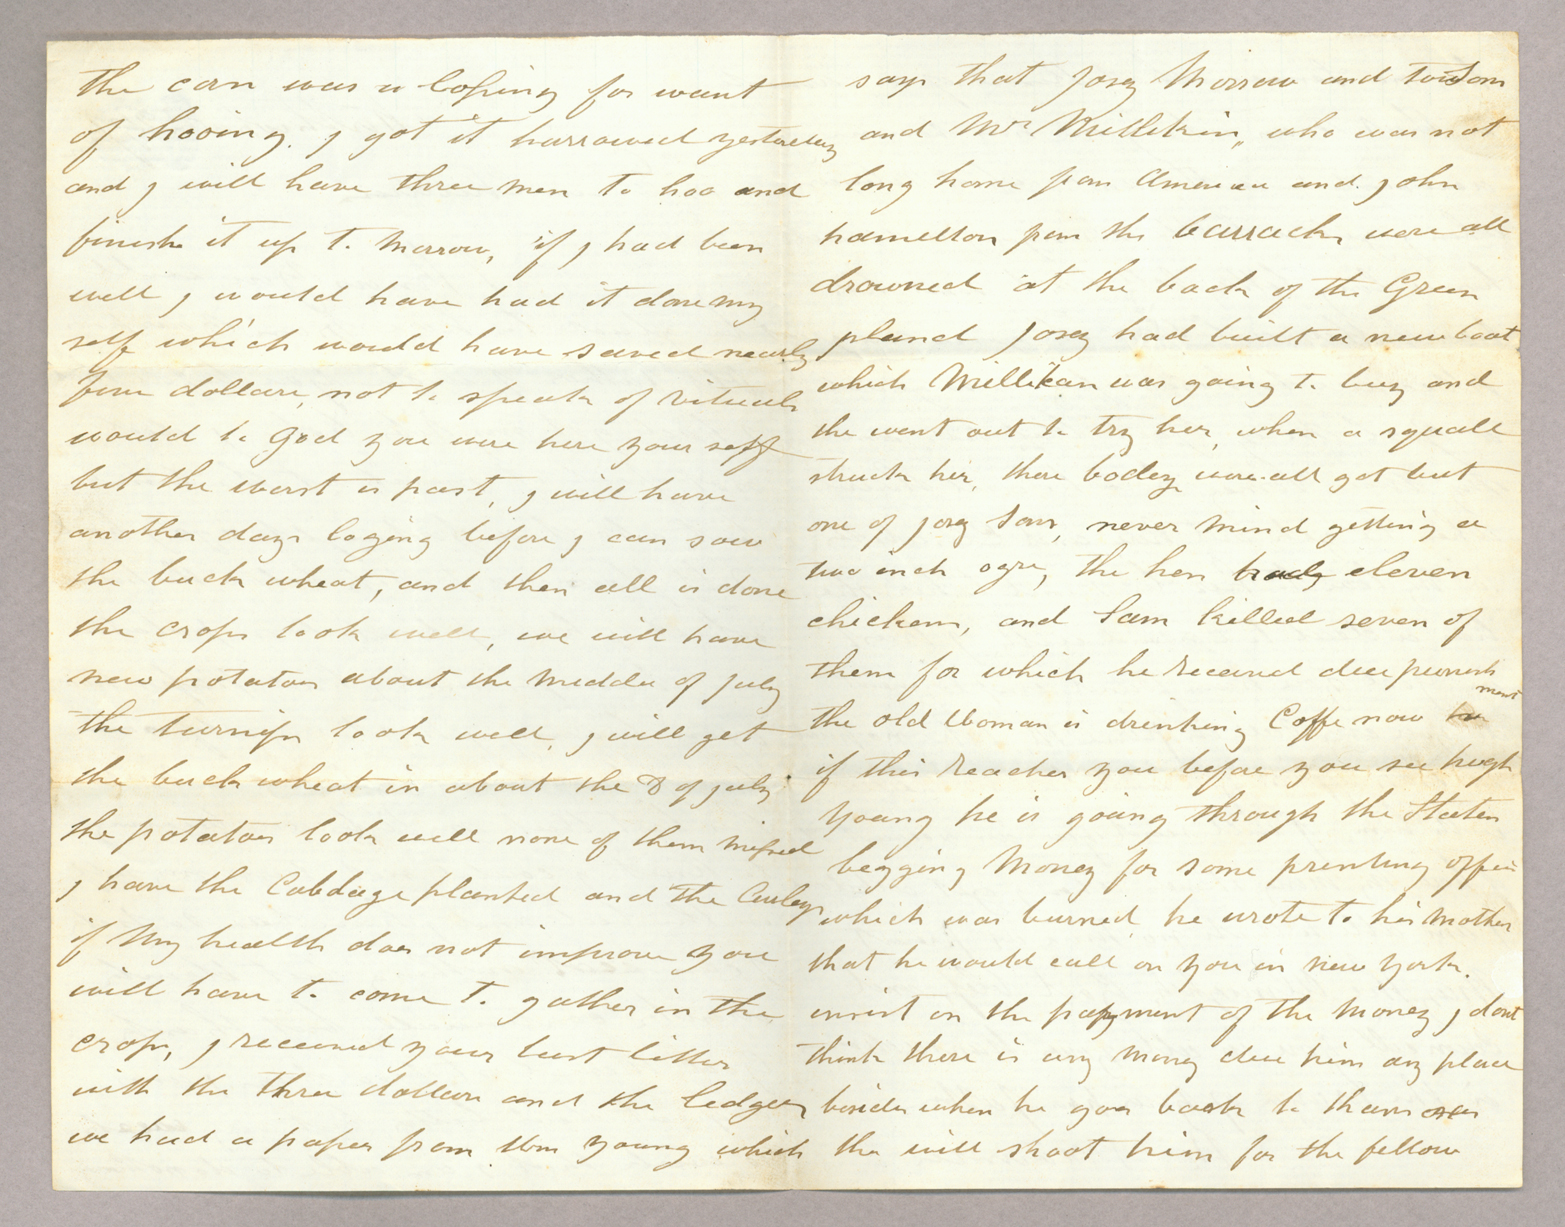 Letter. R[obert] Brownlee, North Wharton, Pennsylvania, to "My dear children" [John E. and Elizabeth Savage Brownlee], n. p., Pages 2-3